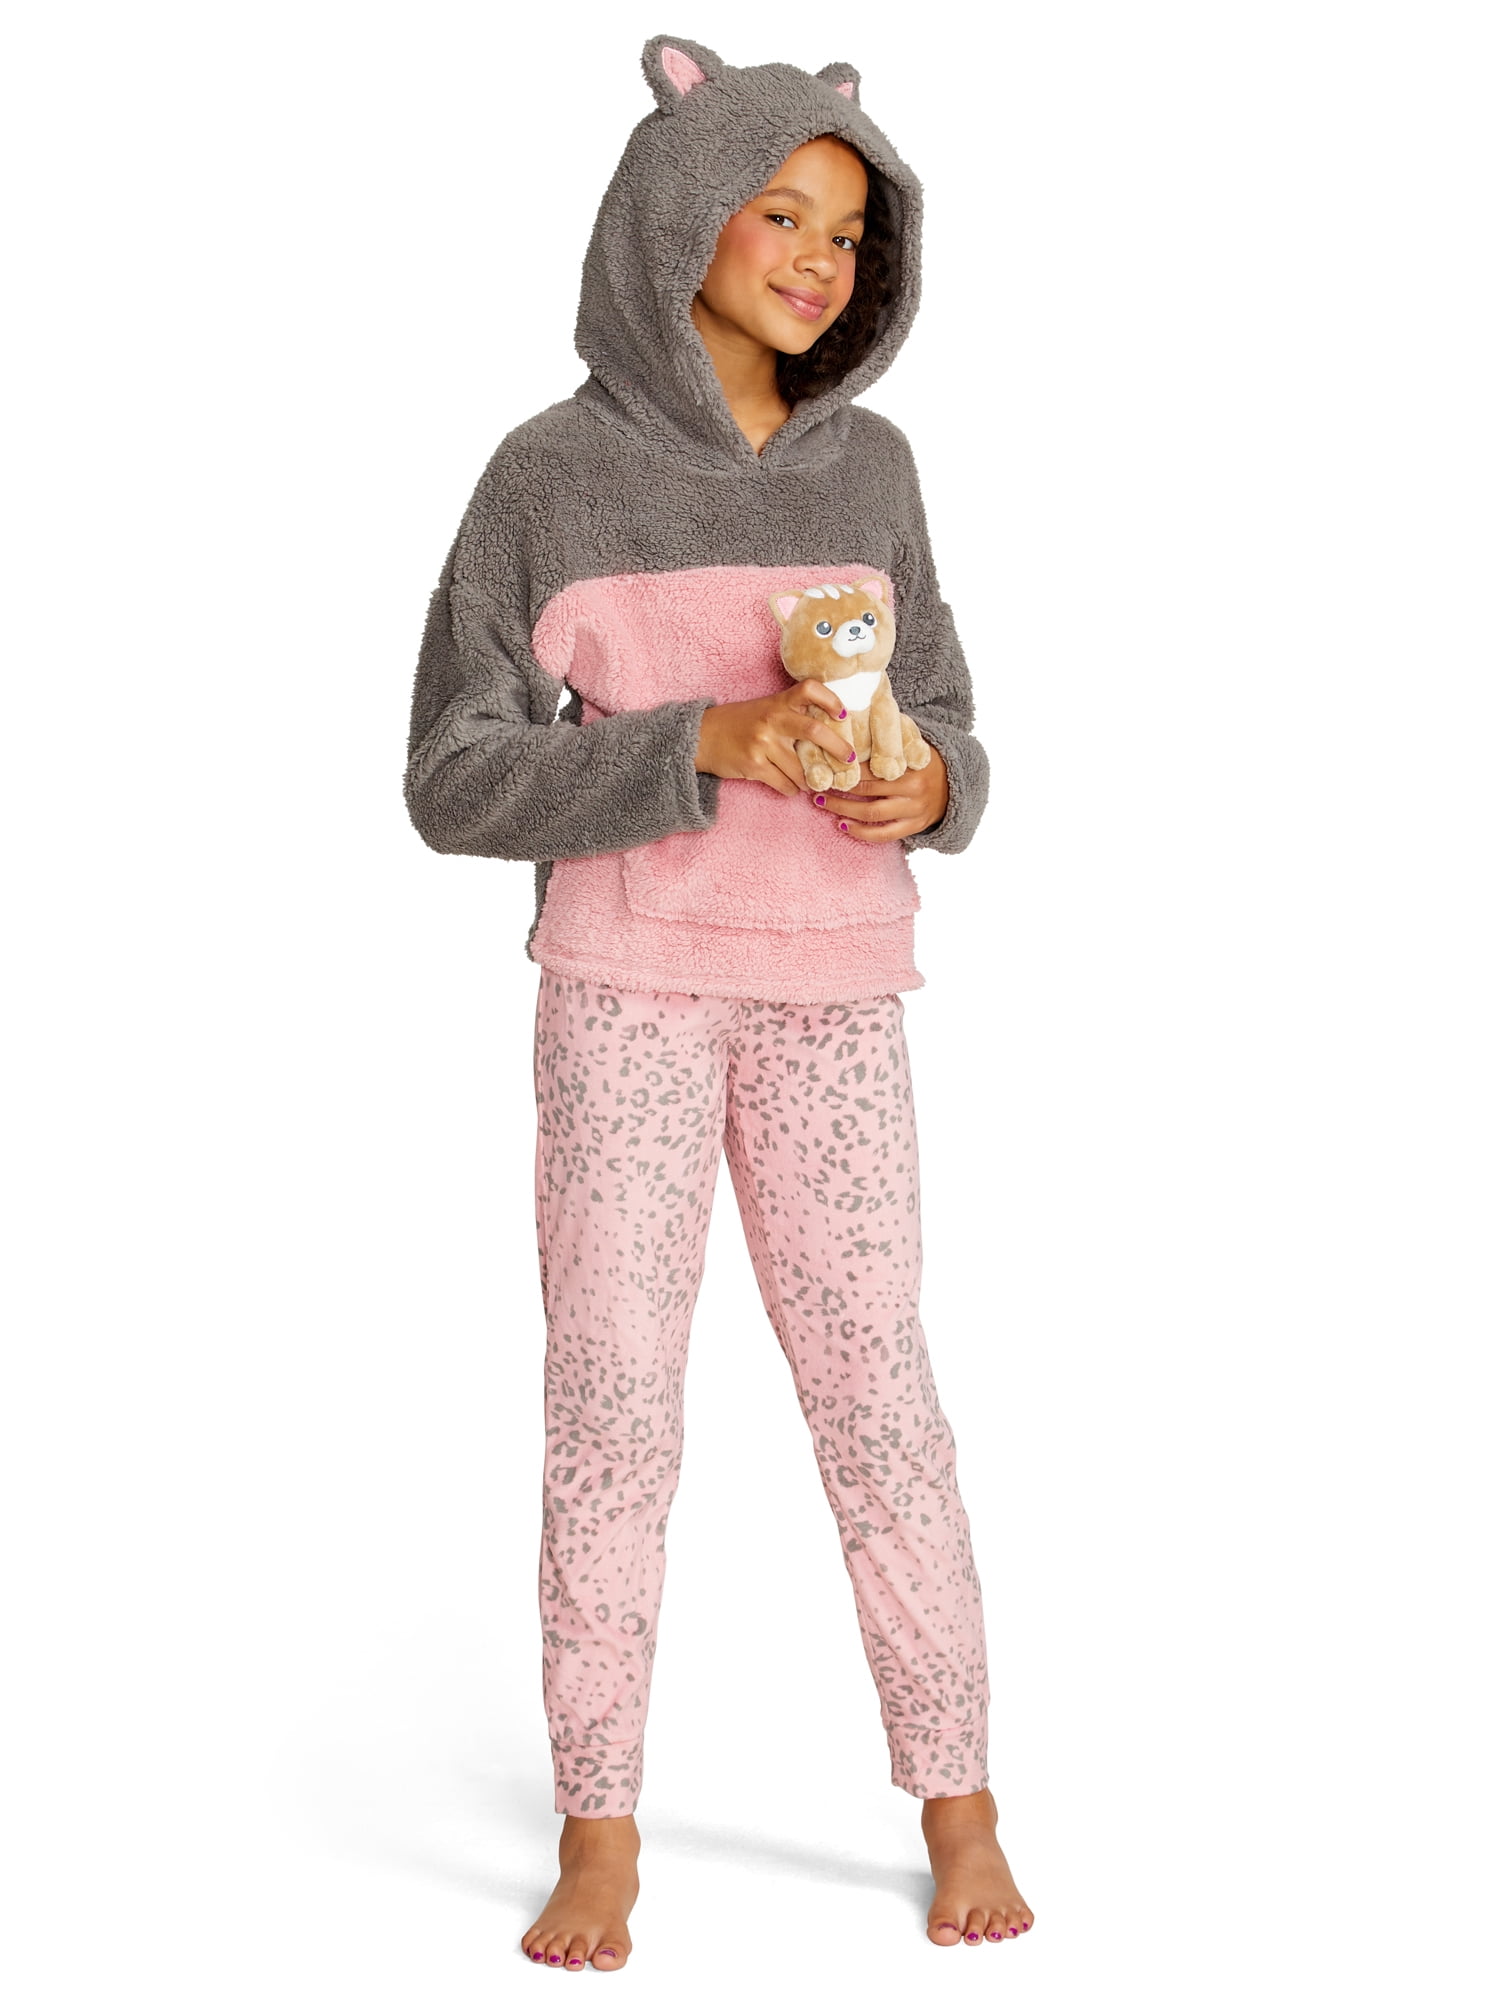 Justice Girls Hooded Unicorn Pajama Cute Tween Soft Size 16/18 one piece New 